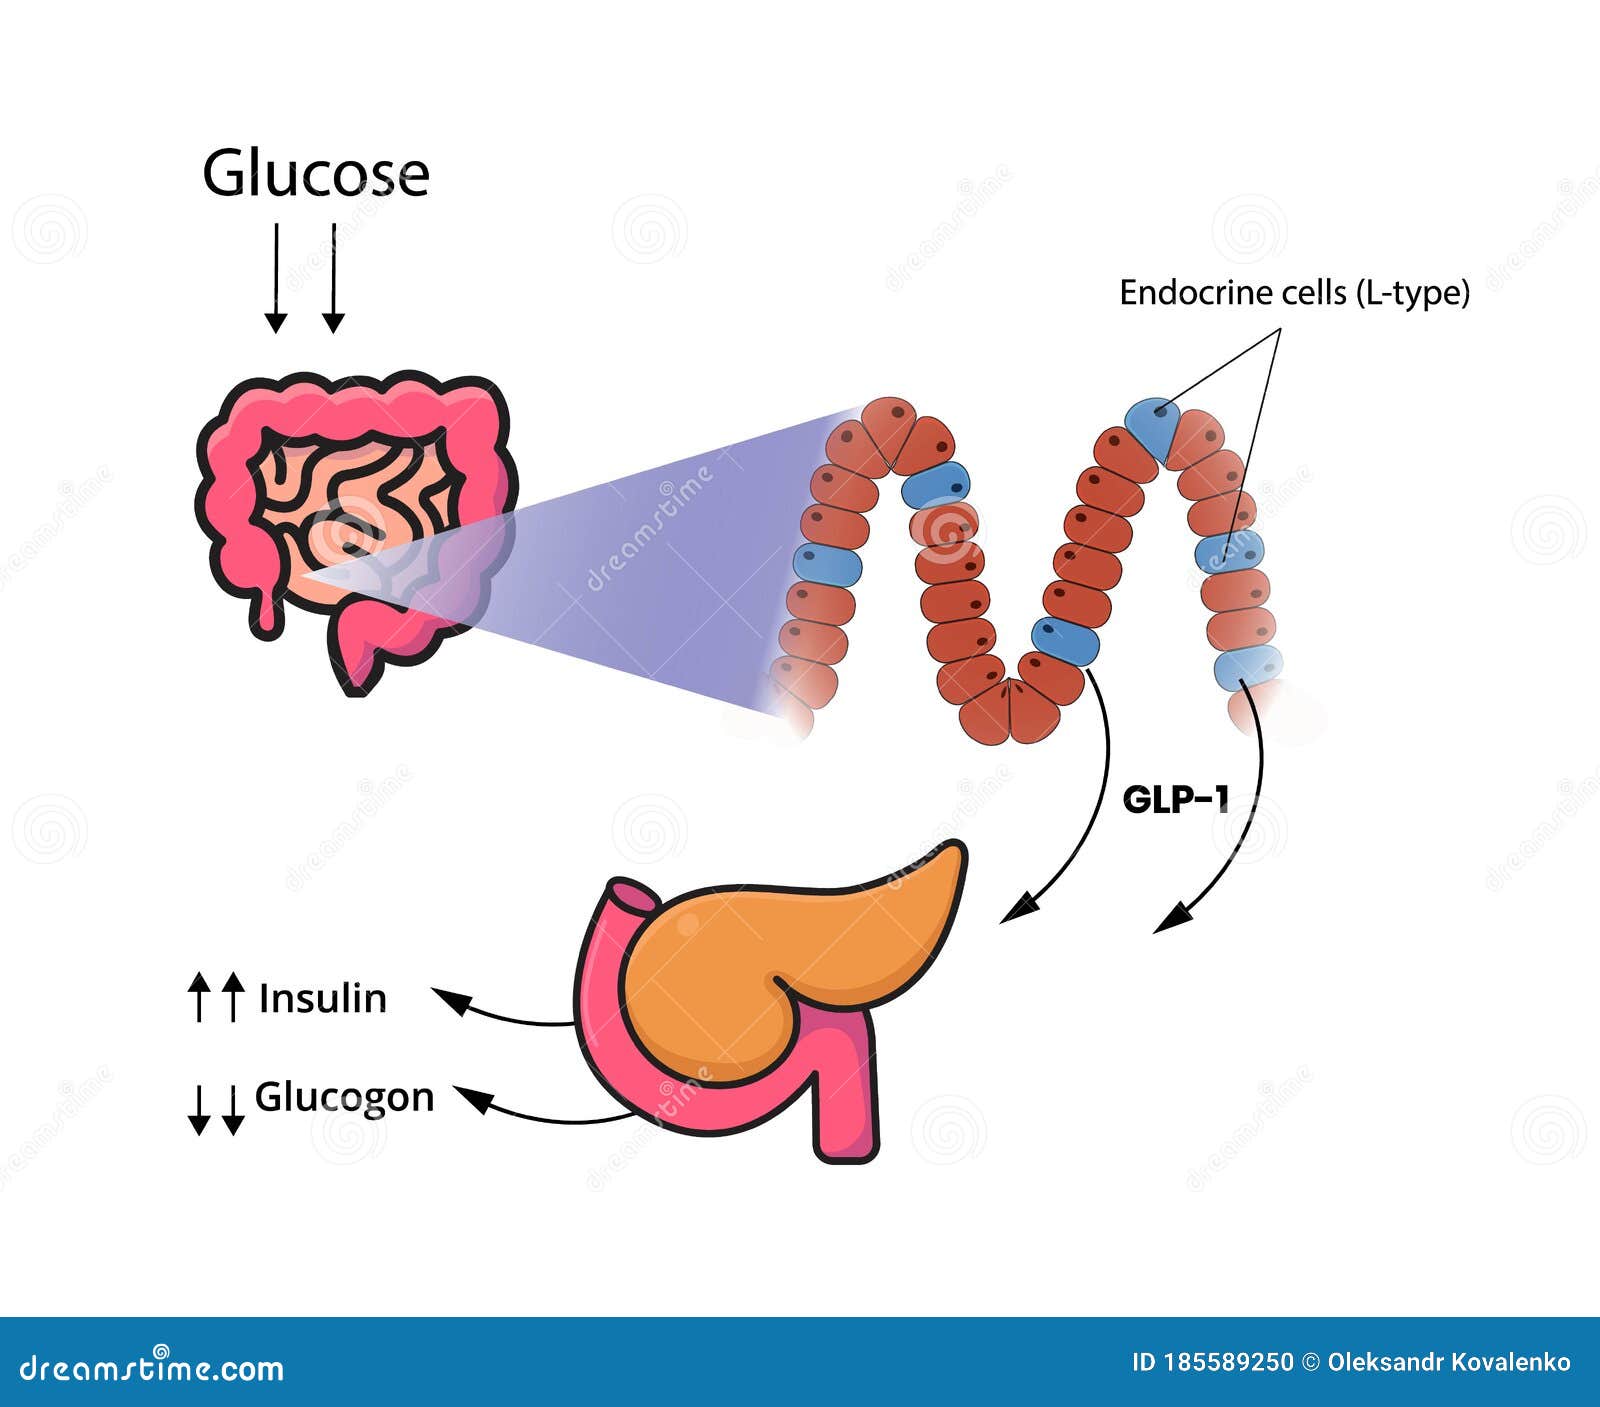 glp-1 release by the cells of the small intestine and colon. l-cells produce glucagon-like peptide in response to glucose